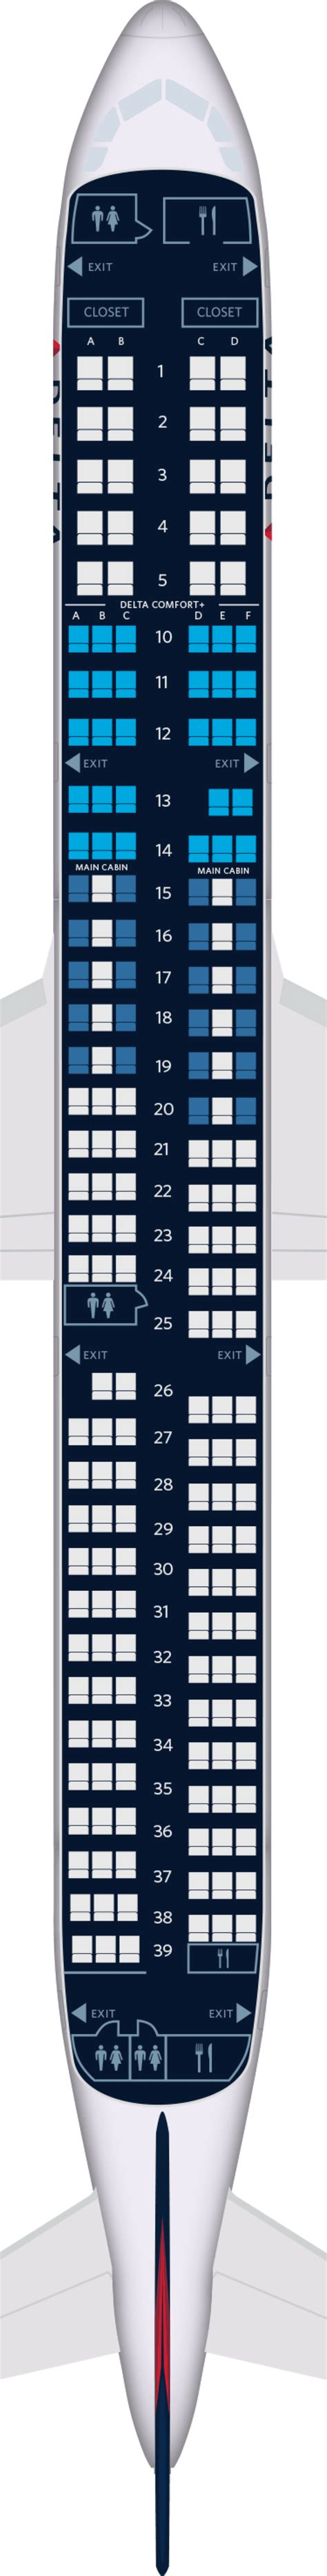 Hawaiian Airlines Seat Map Airbus A Elcho Table